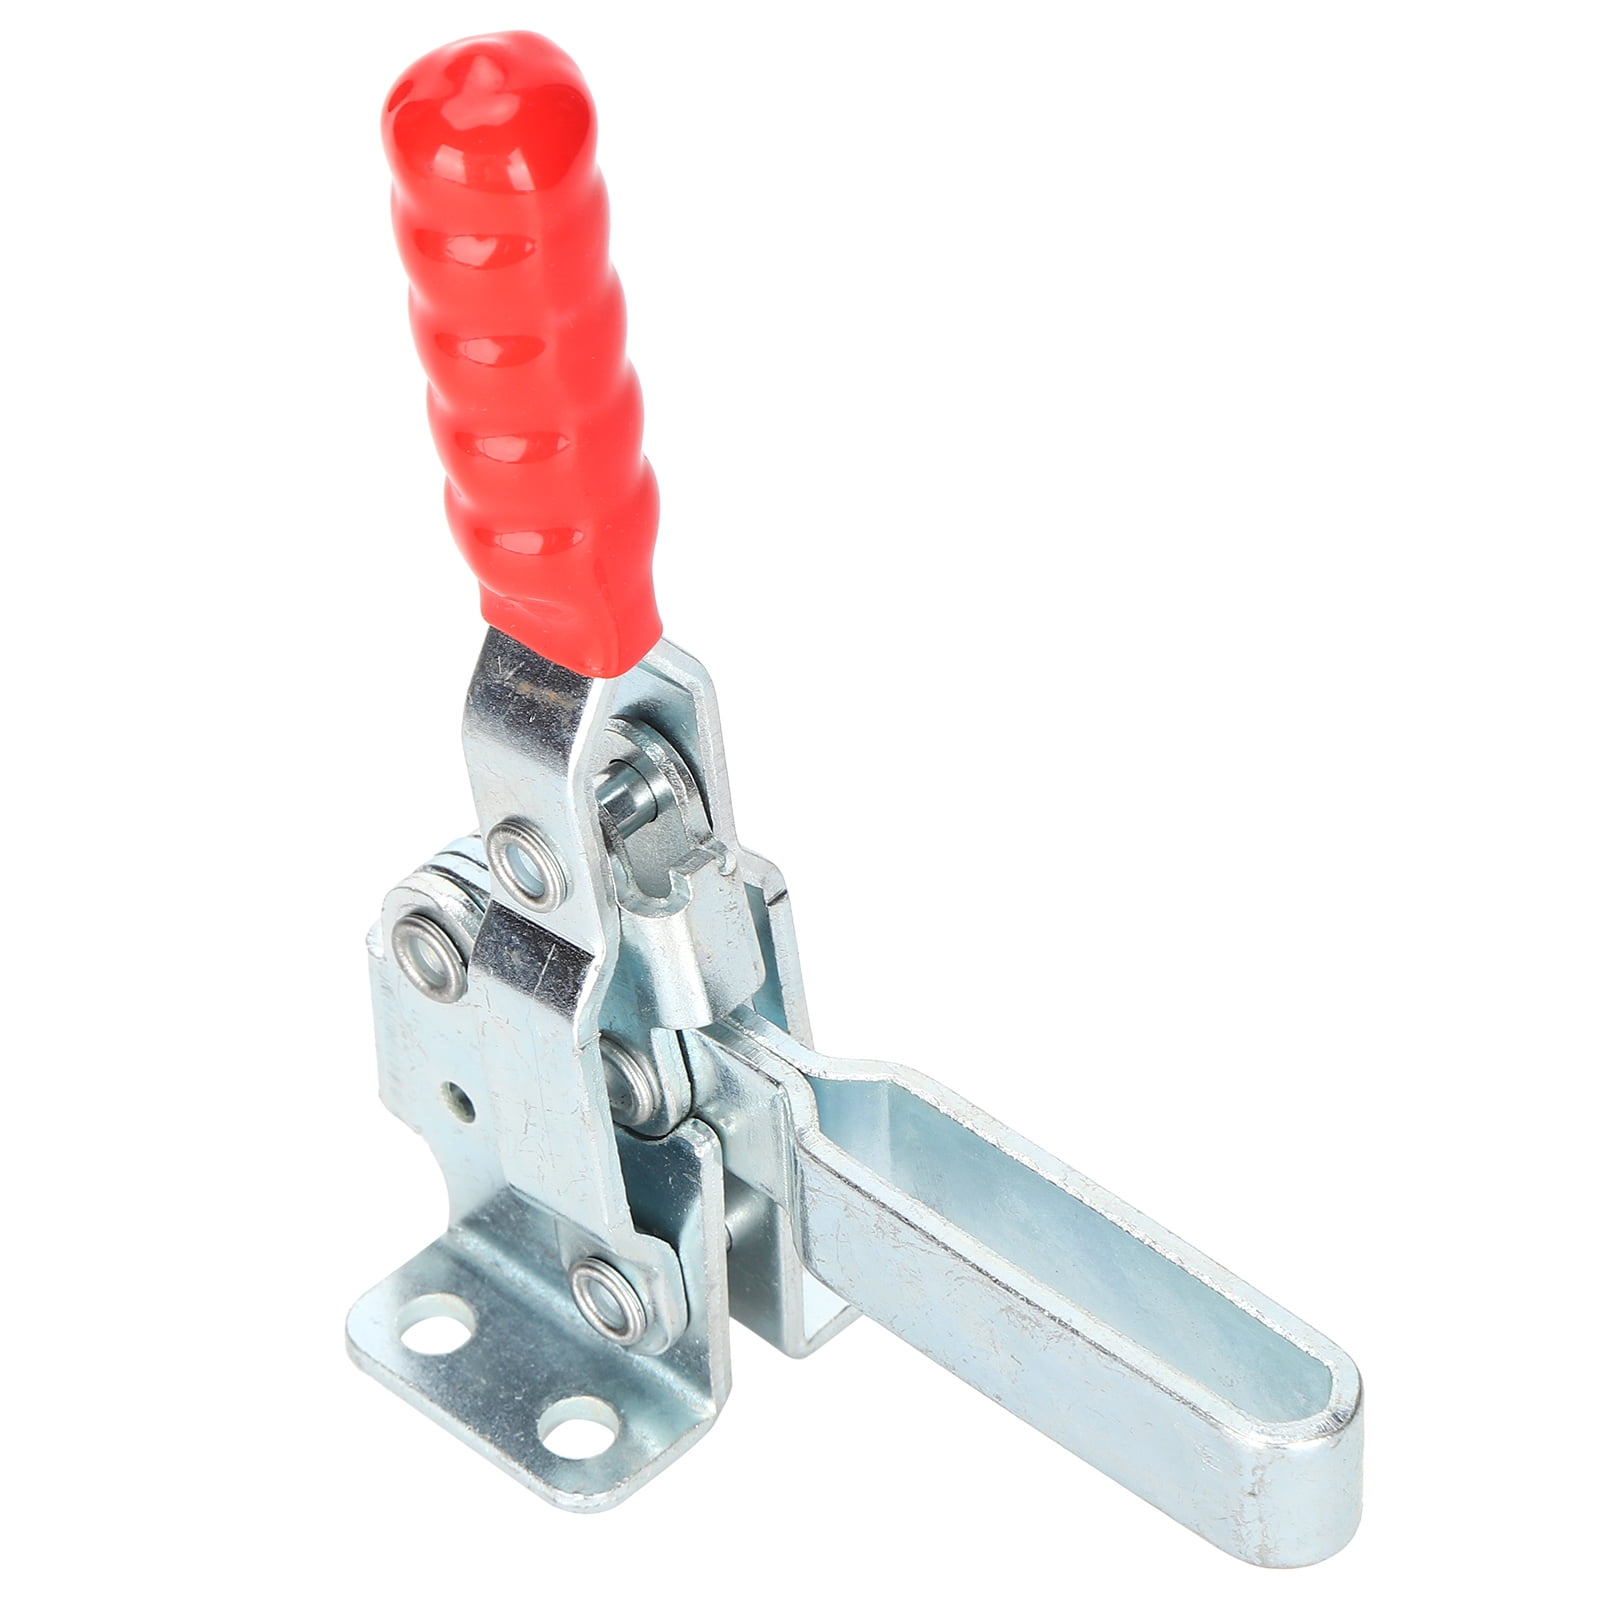 Hand Toggle Clamp Antislip Toggle Clamp 2 Pcs Clamp Hand Tool for Circuit Boards Locating Equipment Locating Objects Quickly Holding Down Metal Sheet 